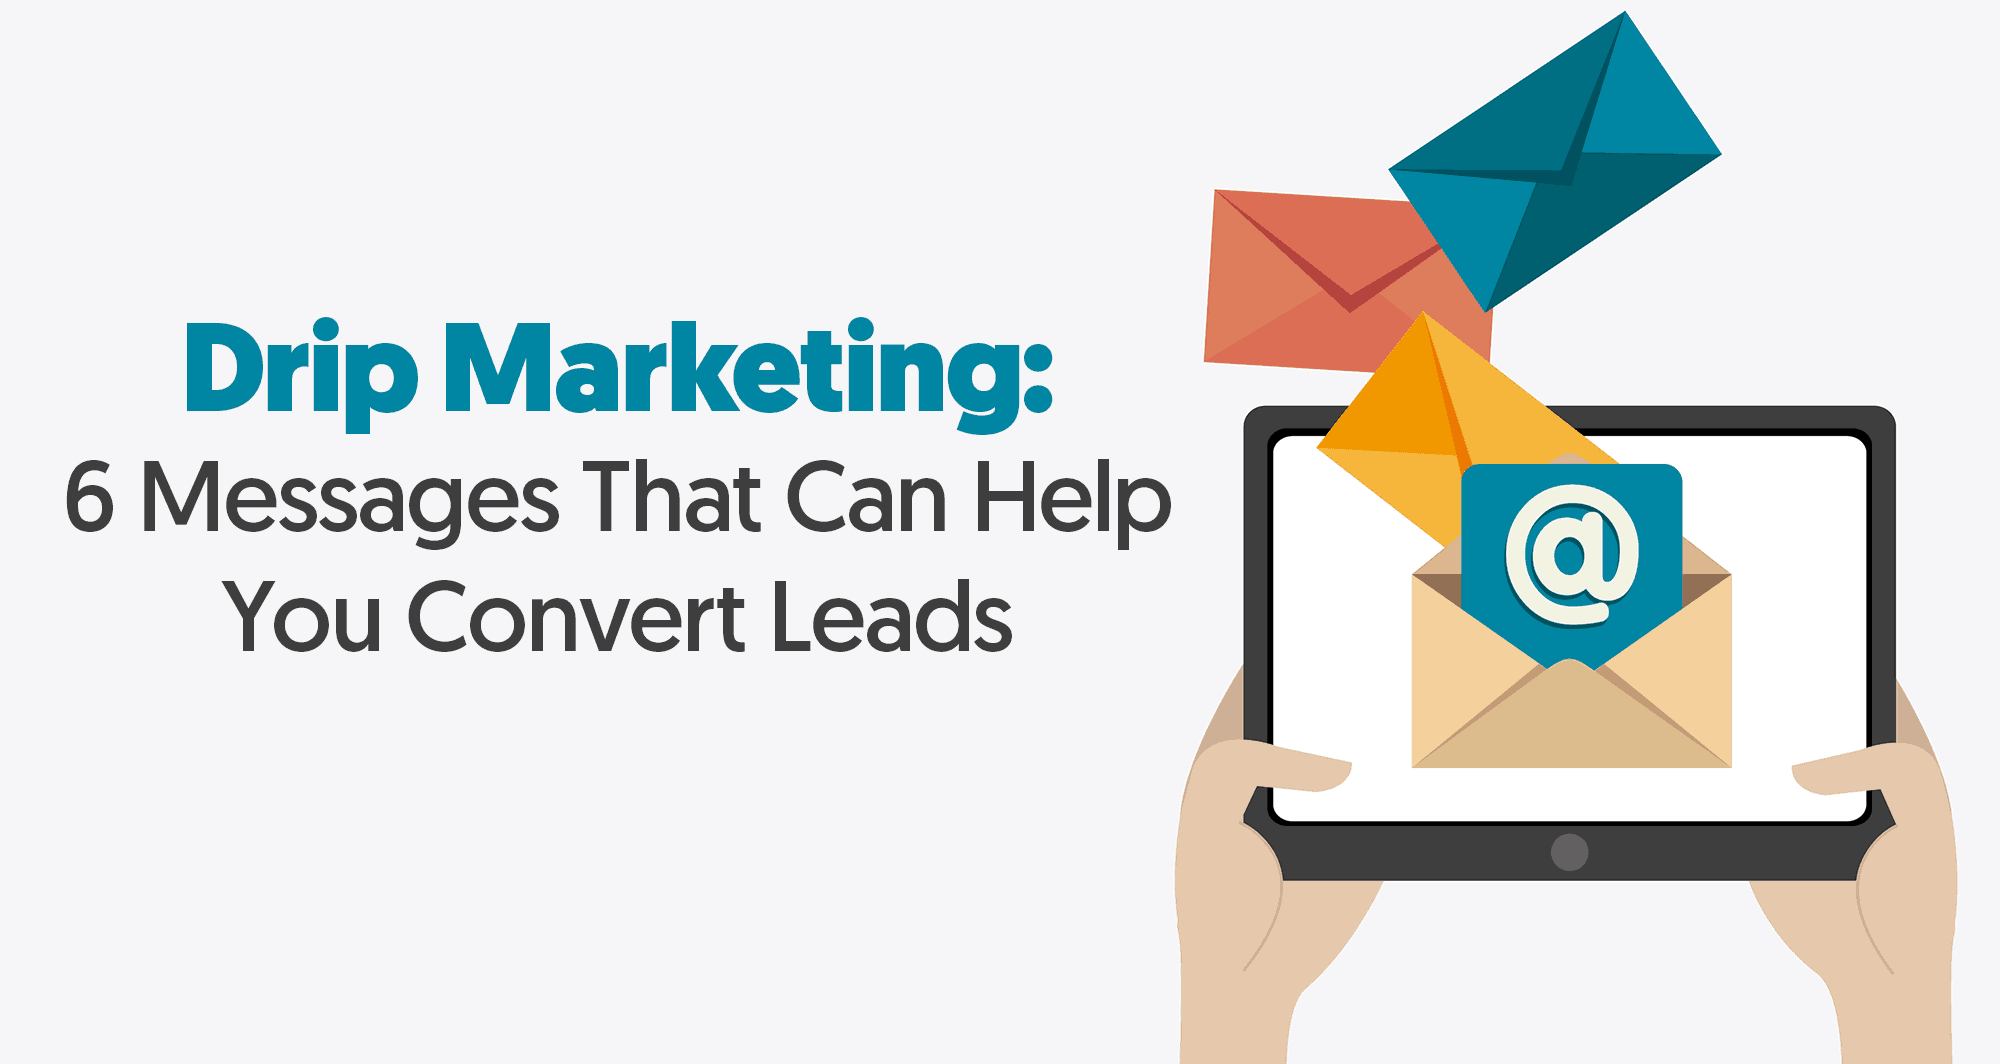 Drip Marketing Messages To Convert Leads